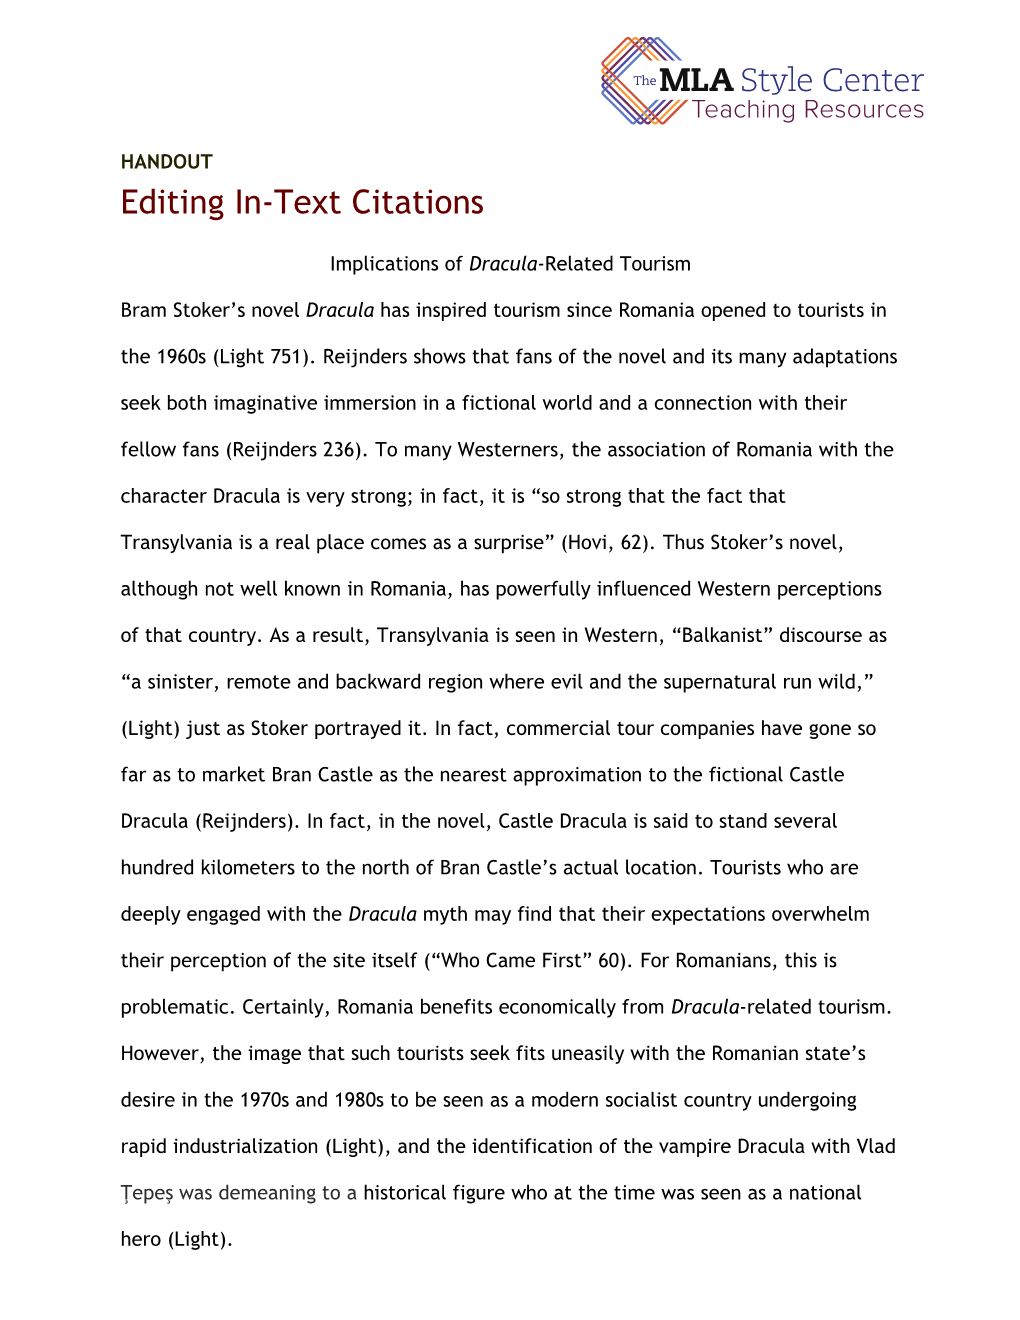 Editing In-Text Citations